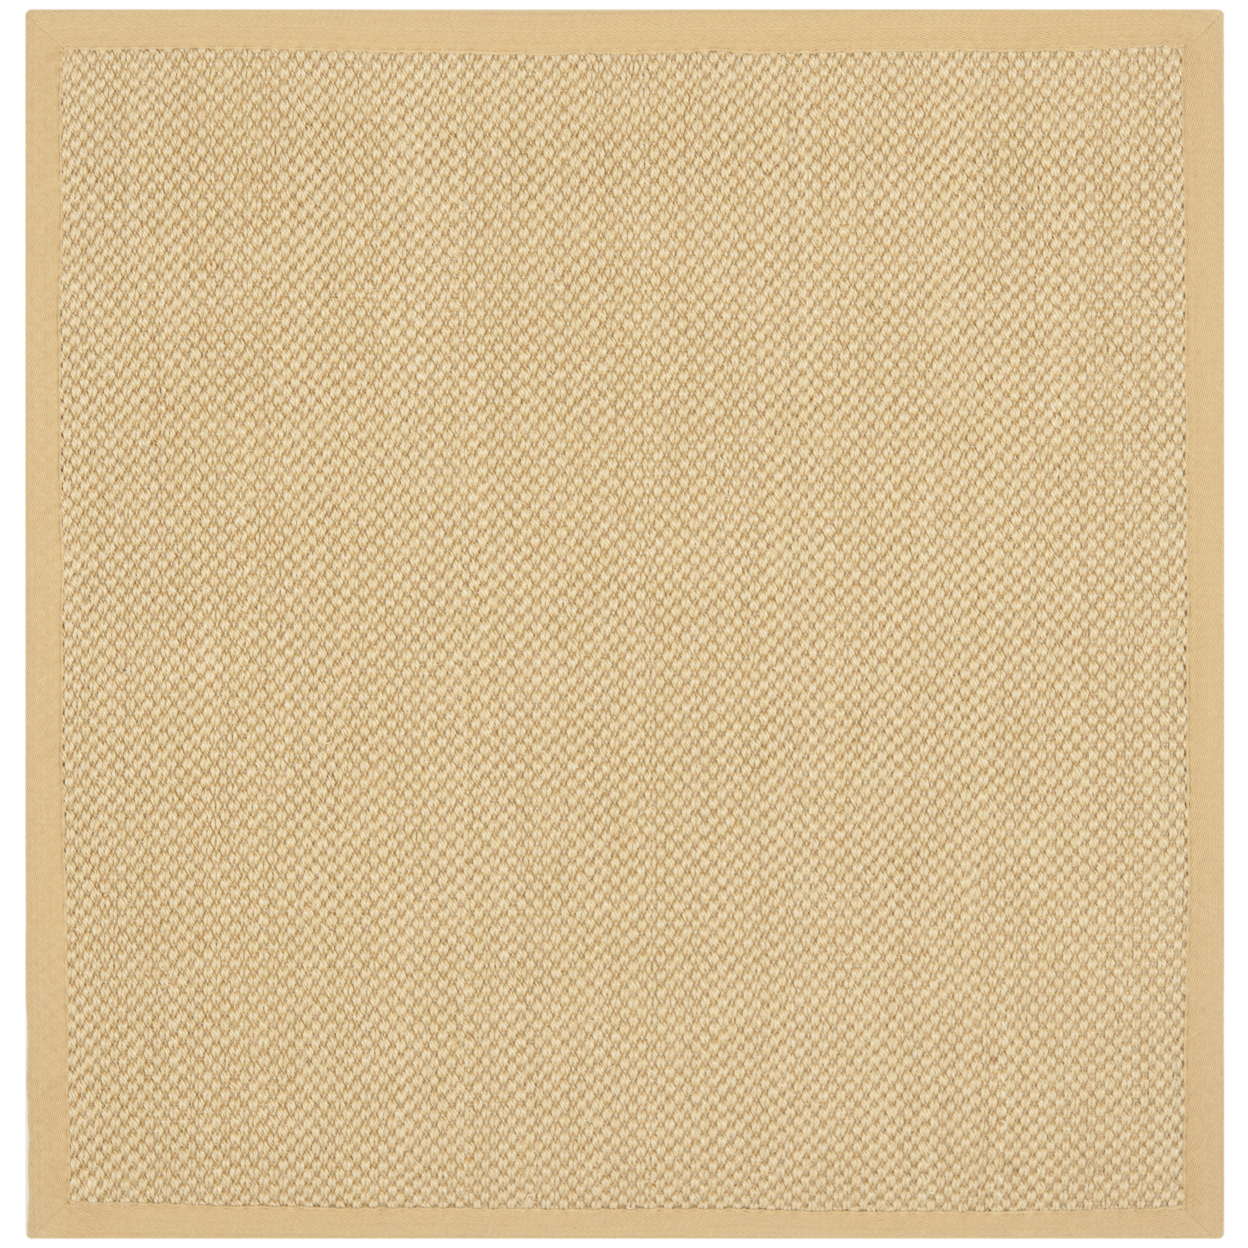 SAFAVIEH Natural Fiber Collection NF443A Maize/Wheat Rug - 4' Square